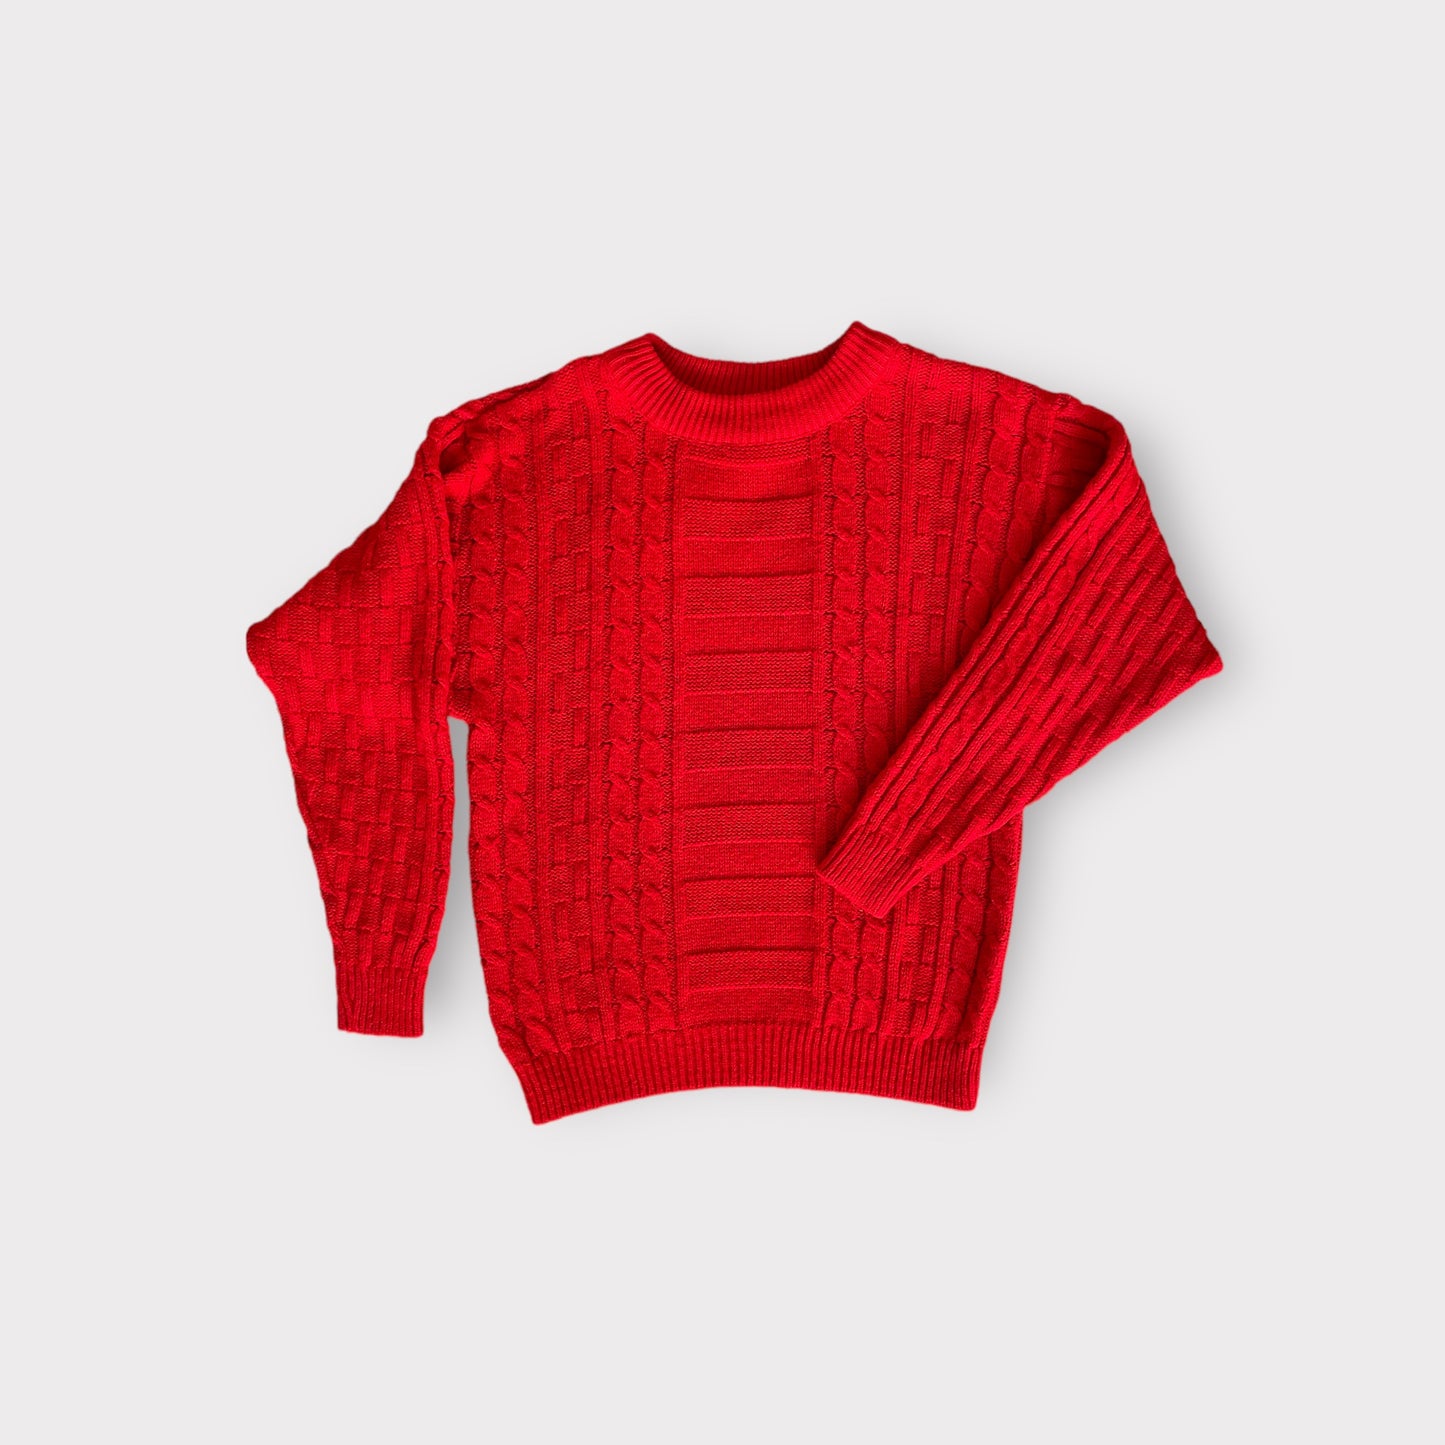 Vermillion red sweater - small -